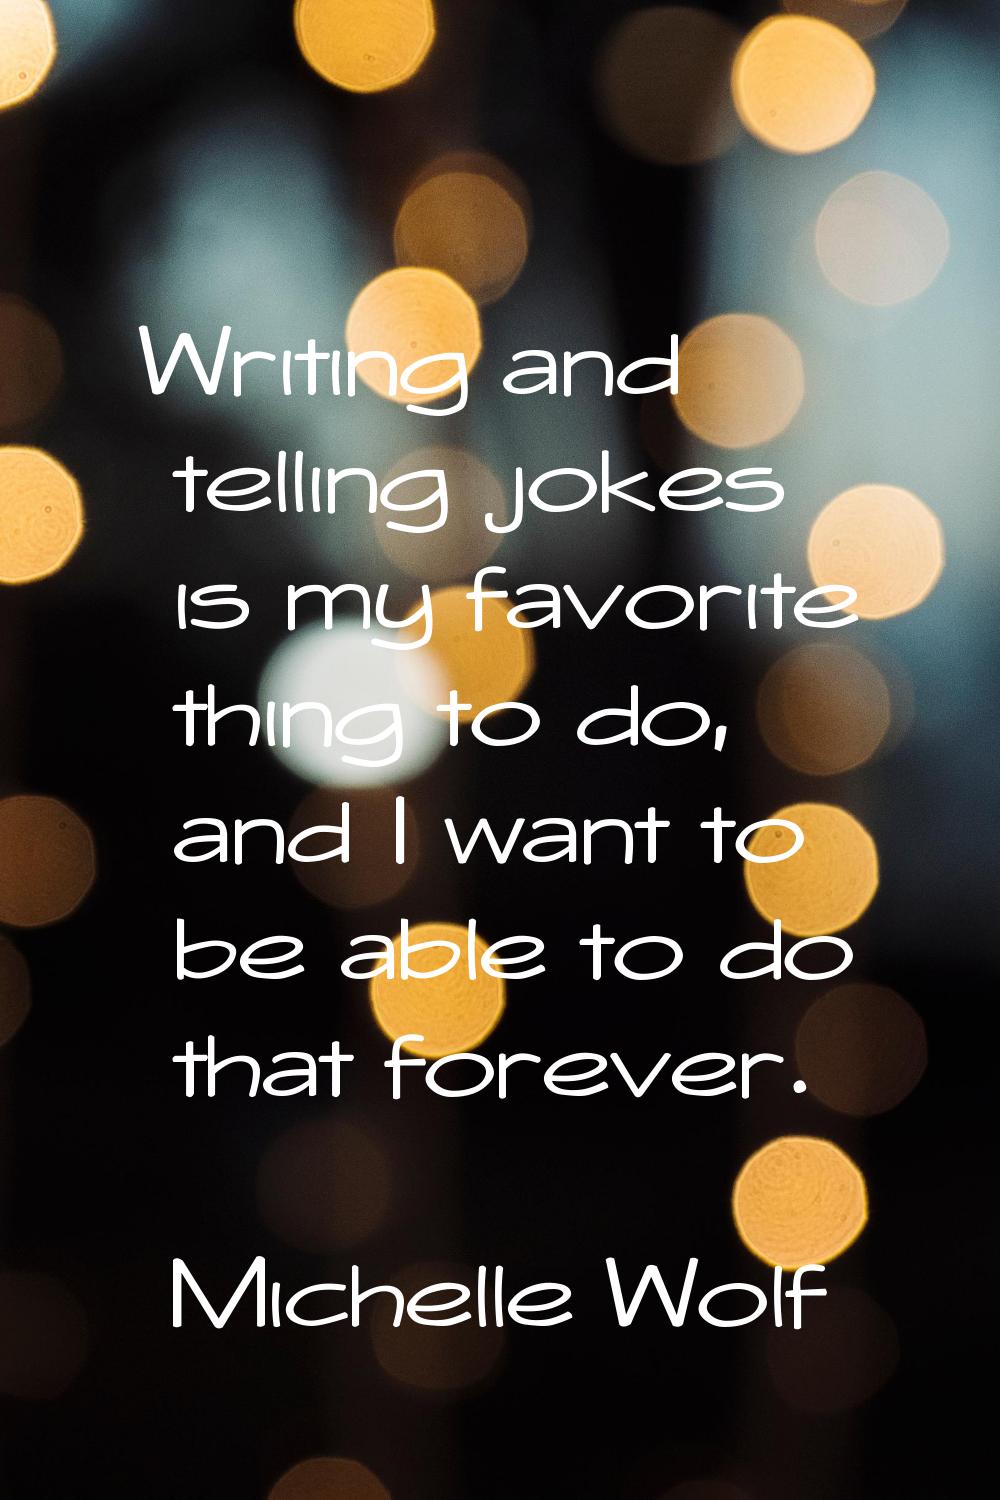 Writing and telling jokes is my favorite thing to do, and I want to be able to do that forever.